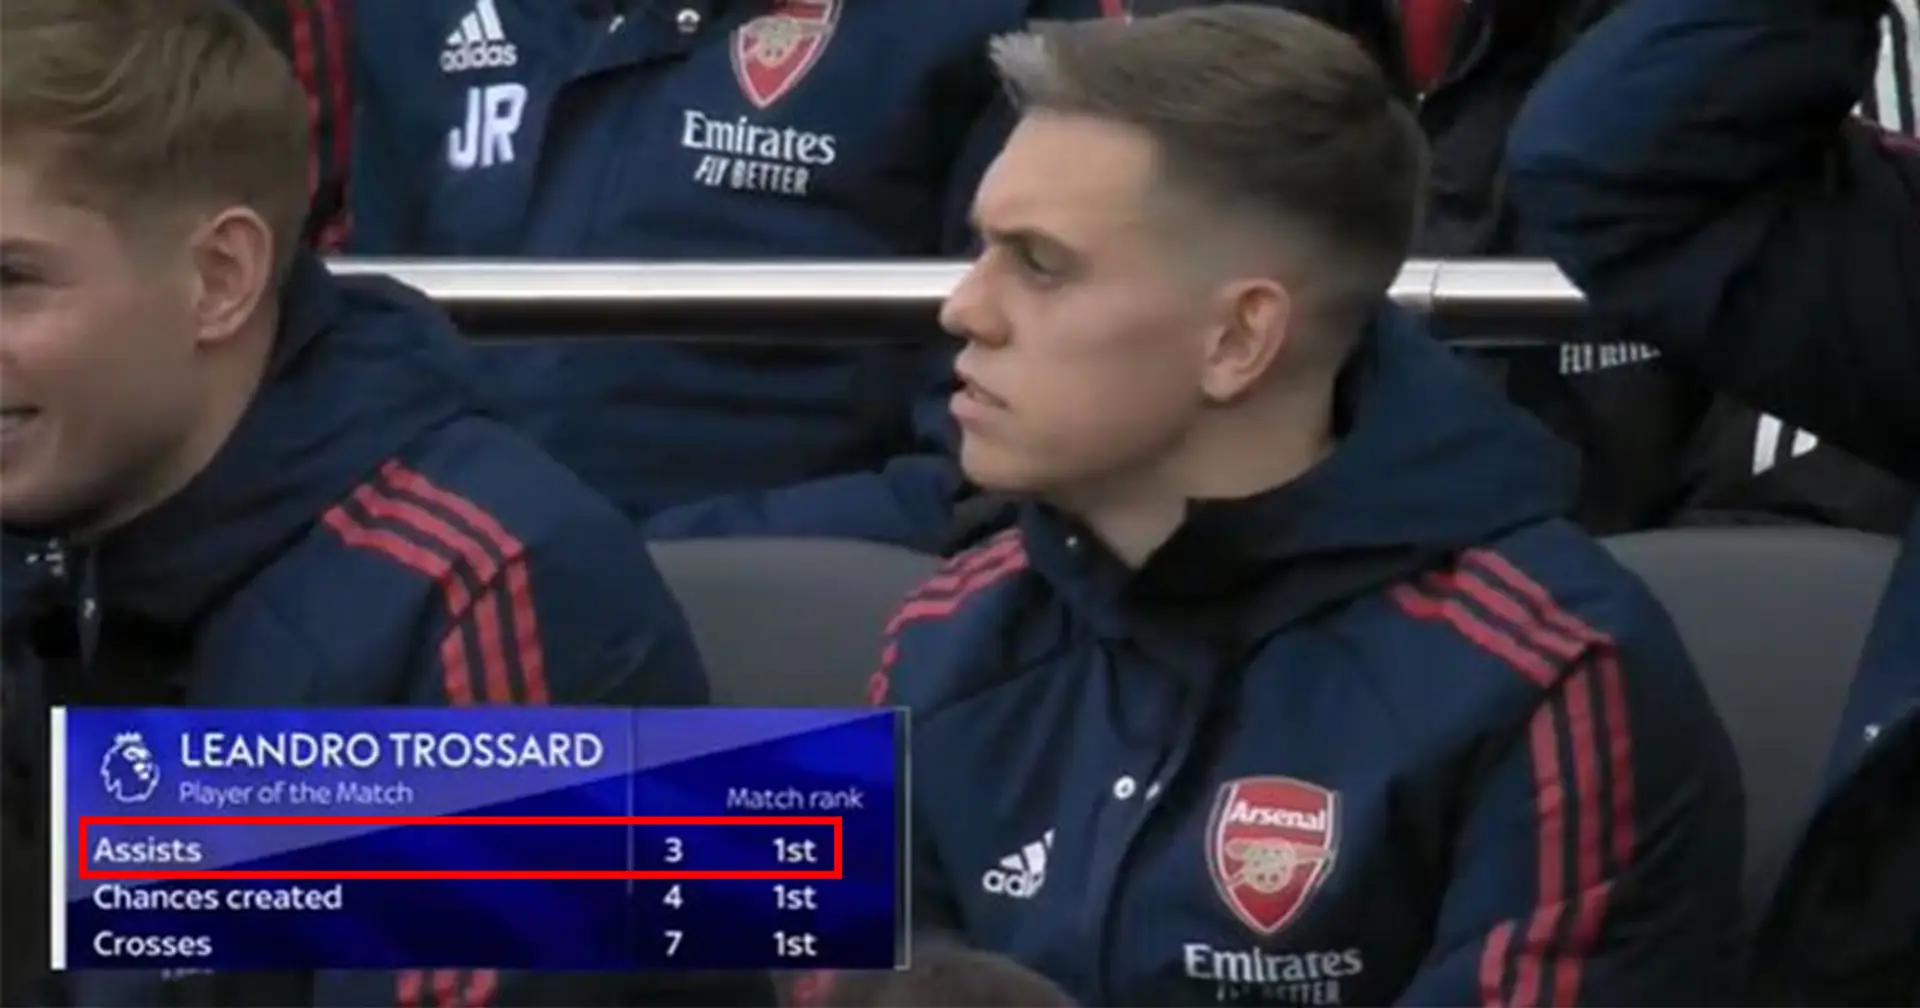 When was the last time Arsenal player assisted 3 times in one game? Answered